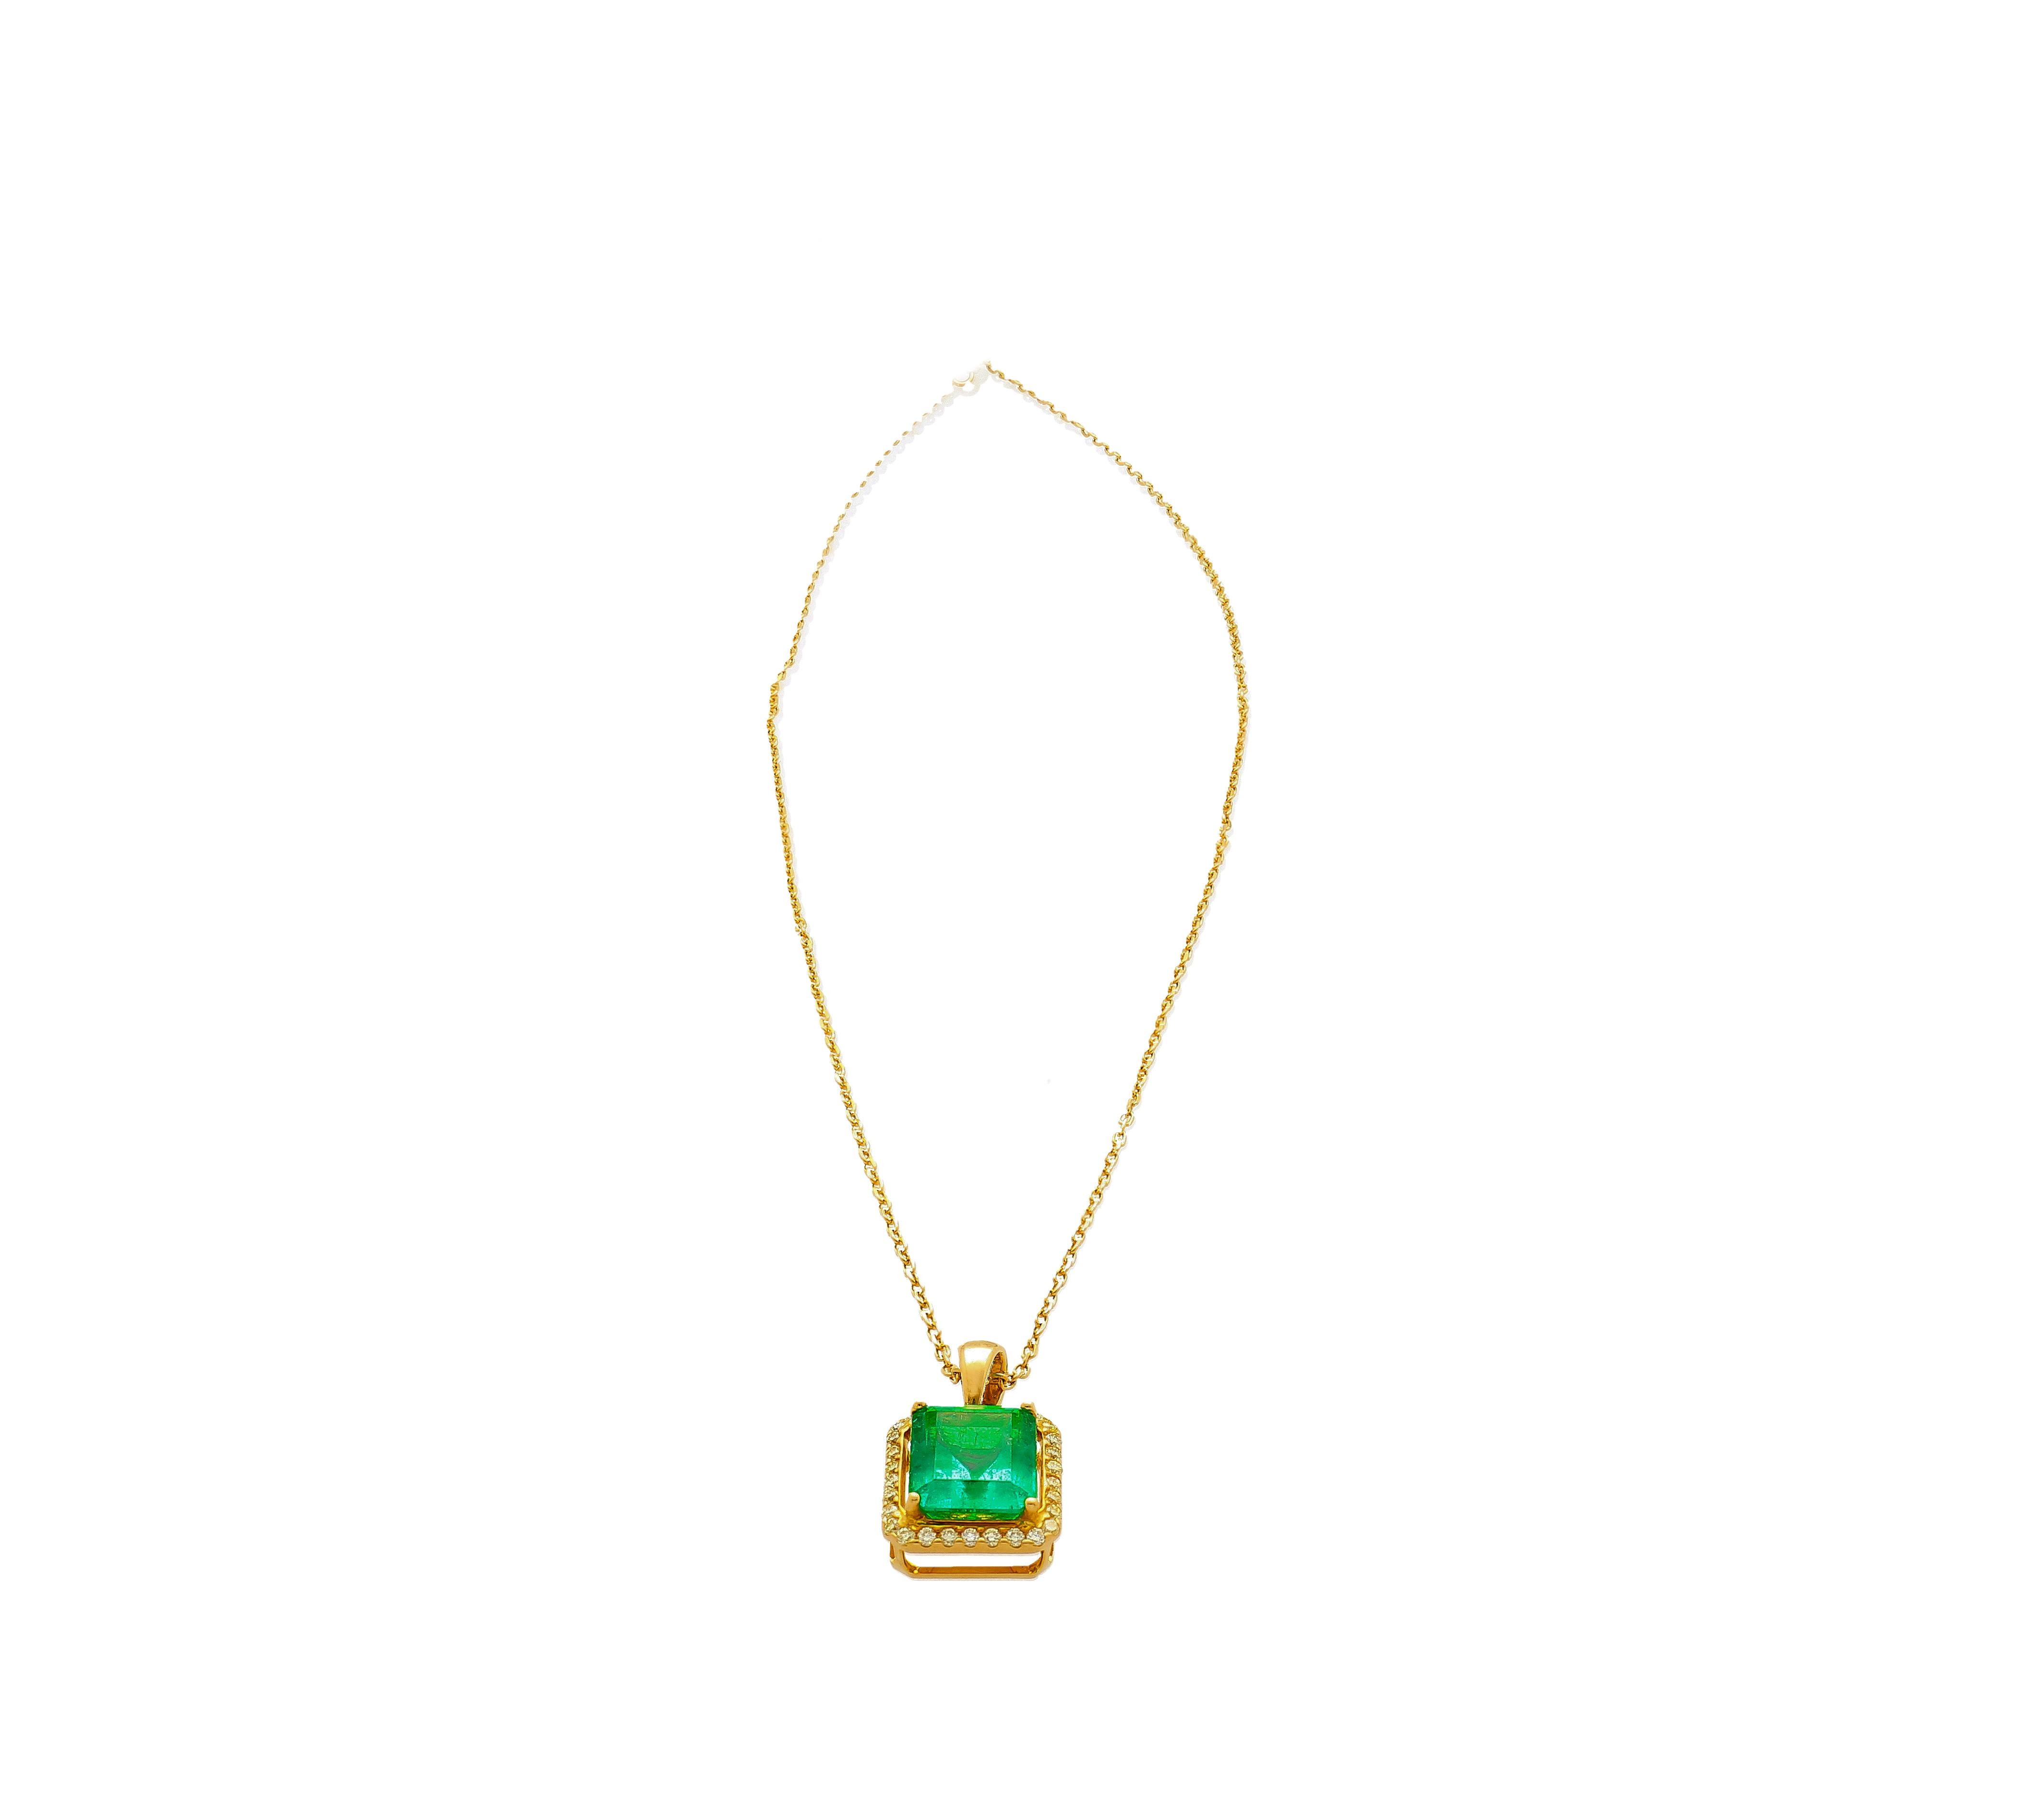 Emerald Cut 5.42 Carat Natural Emerald Pendant Necklace with Yellow Diamond Halo in 18k Gold For Sale